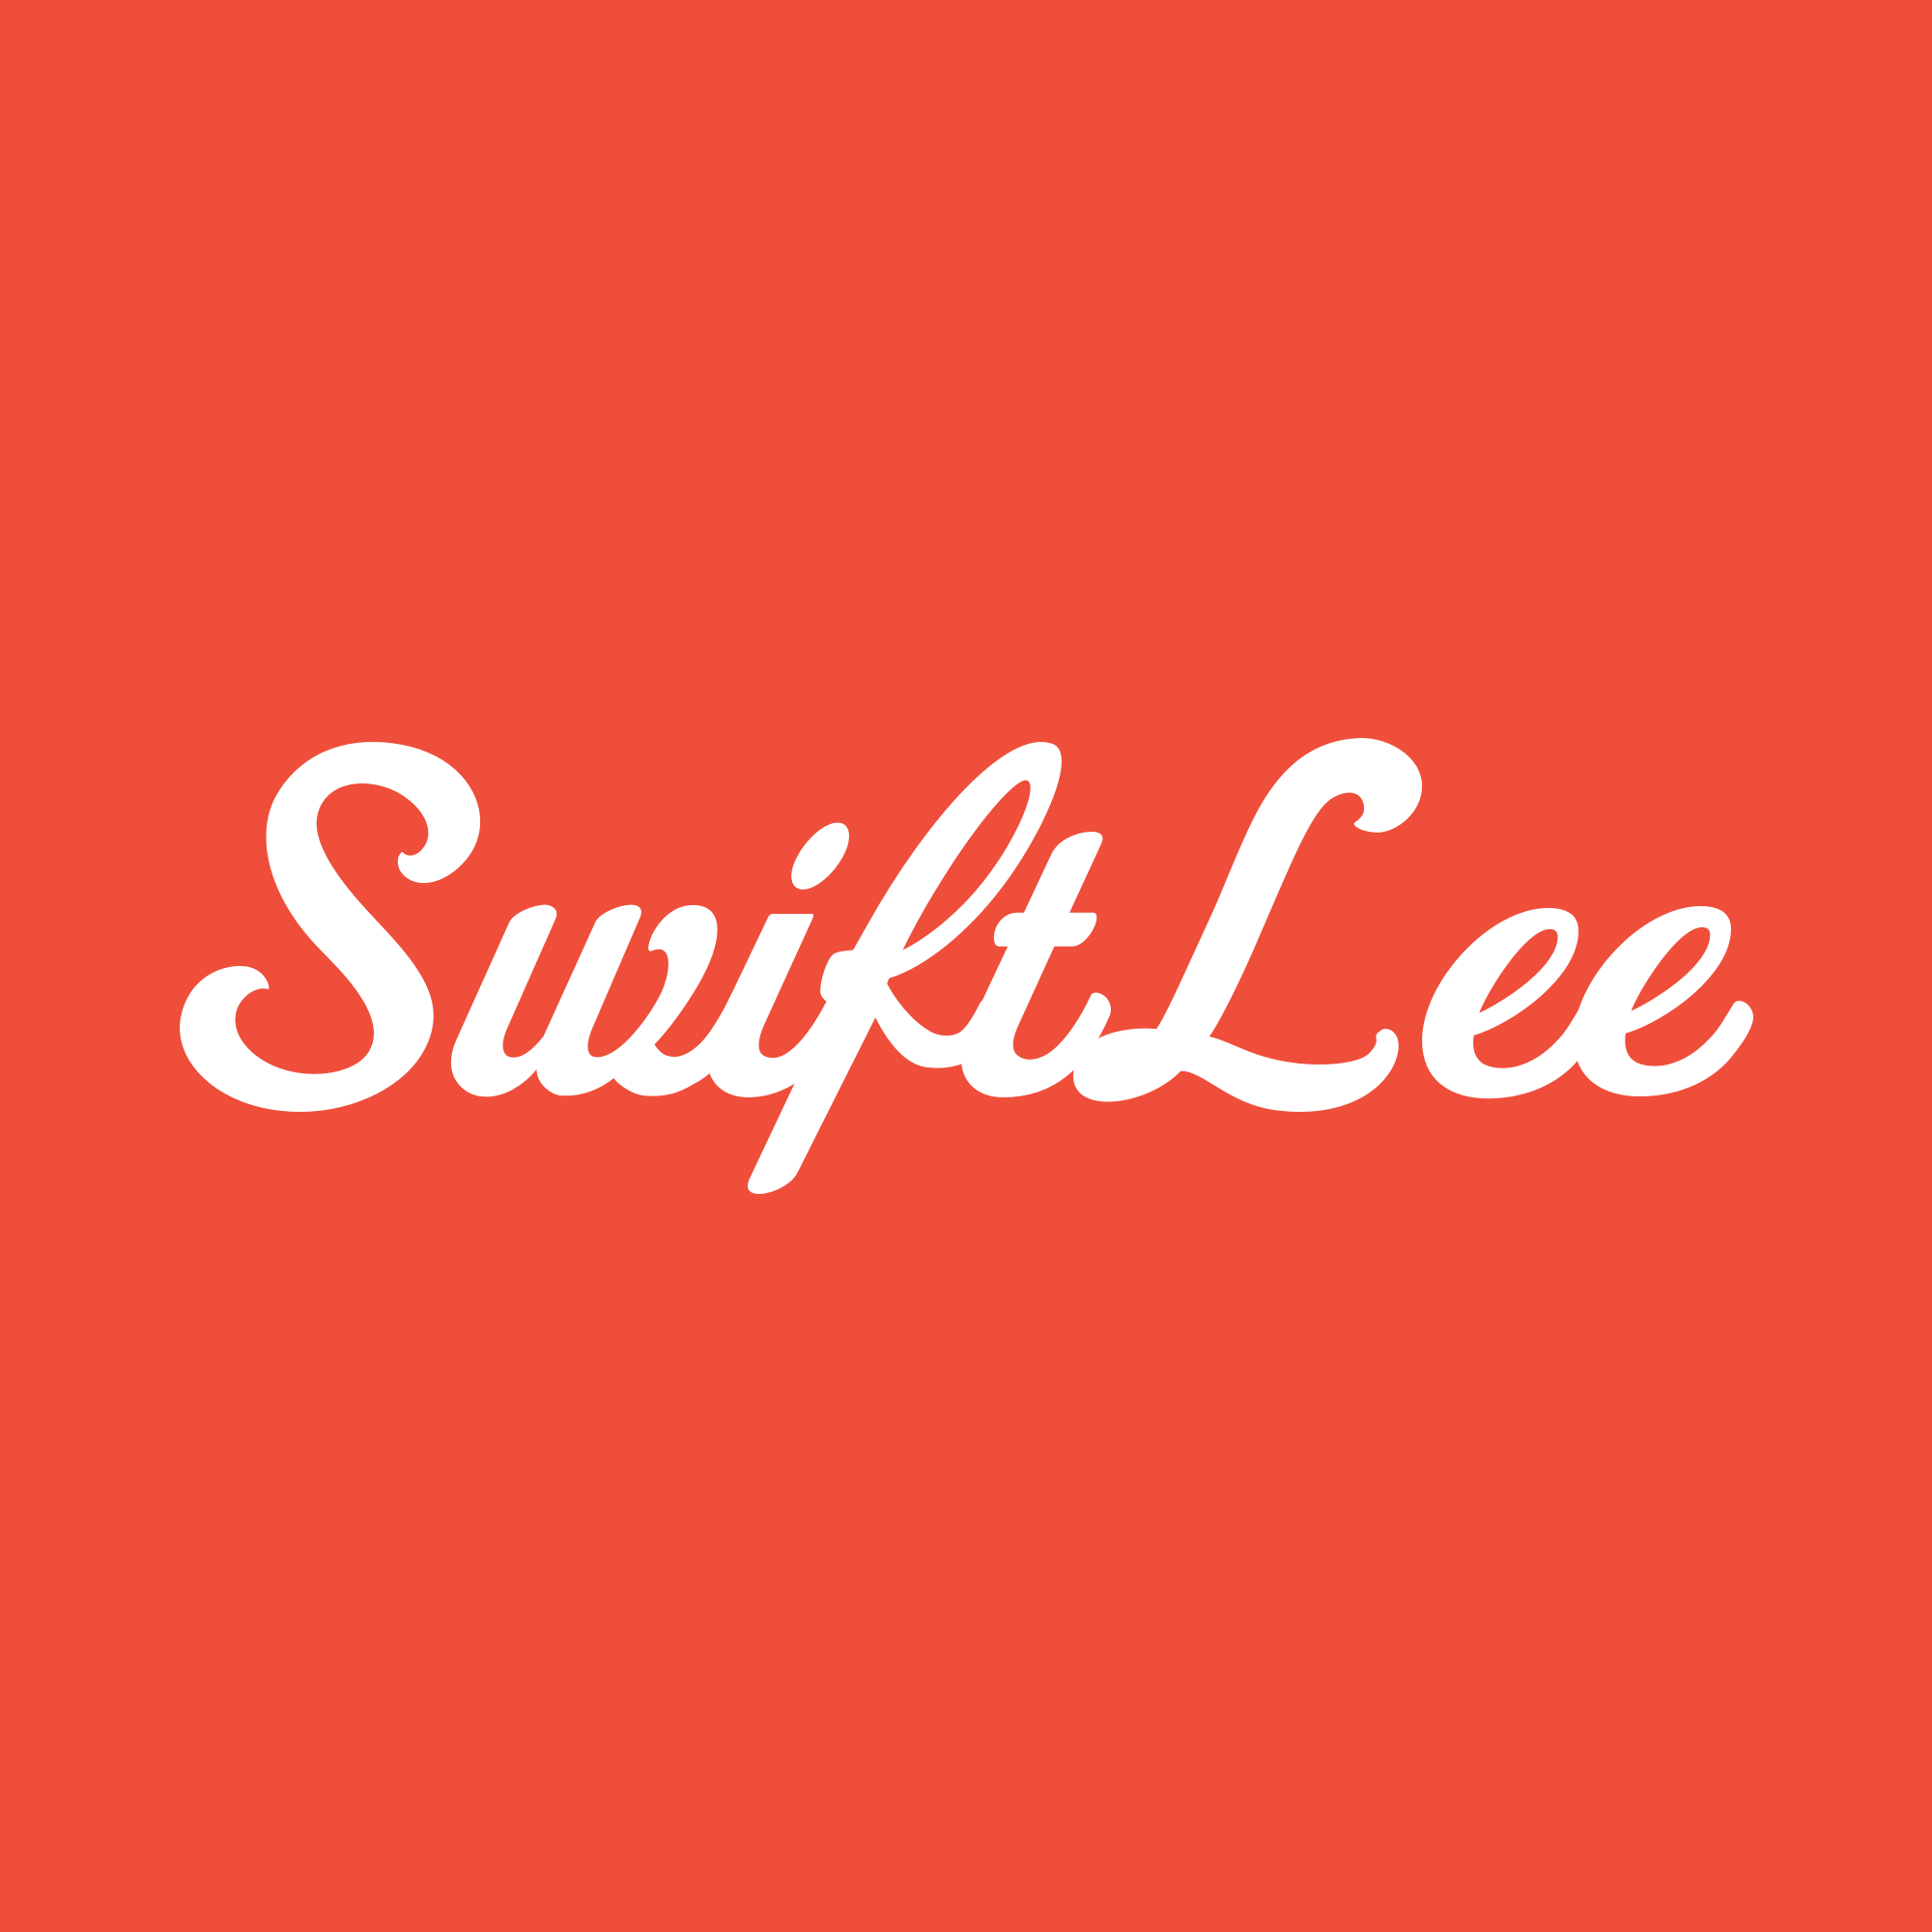 A weekly Swift Blog on Xcode and iOS Development - SwiftLee